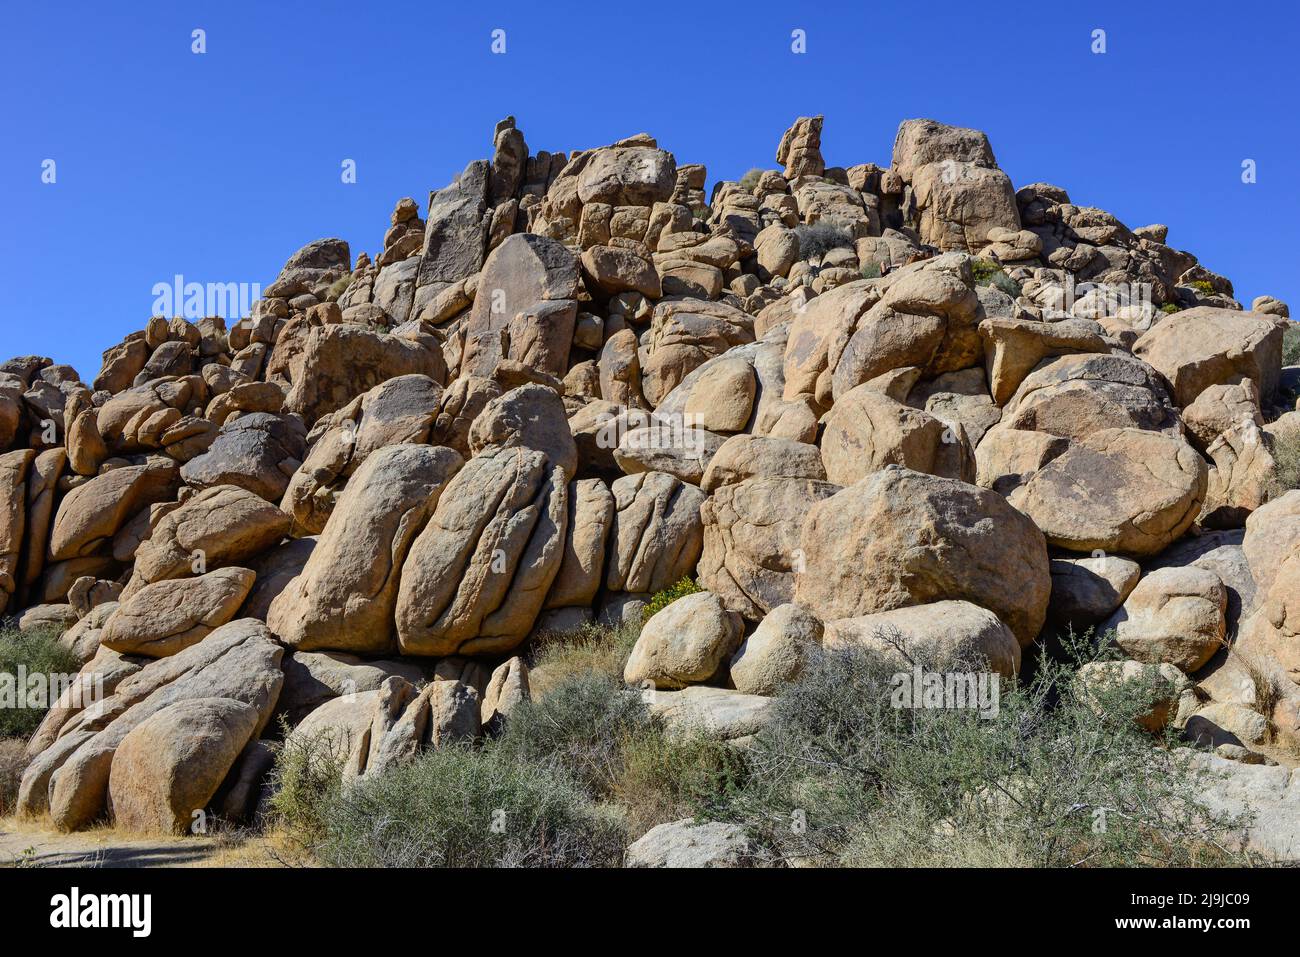 The unique Joshua tree with it's hairy trunk and spiky clusters amongst the boulders of the Joshua Tree National Park, in the Mojave desert, Southern Stock Photo